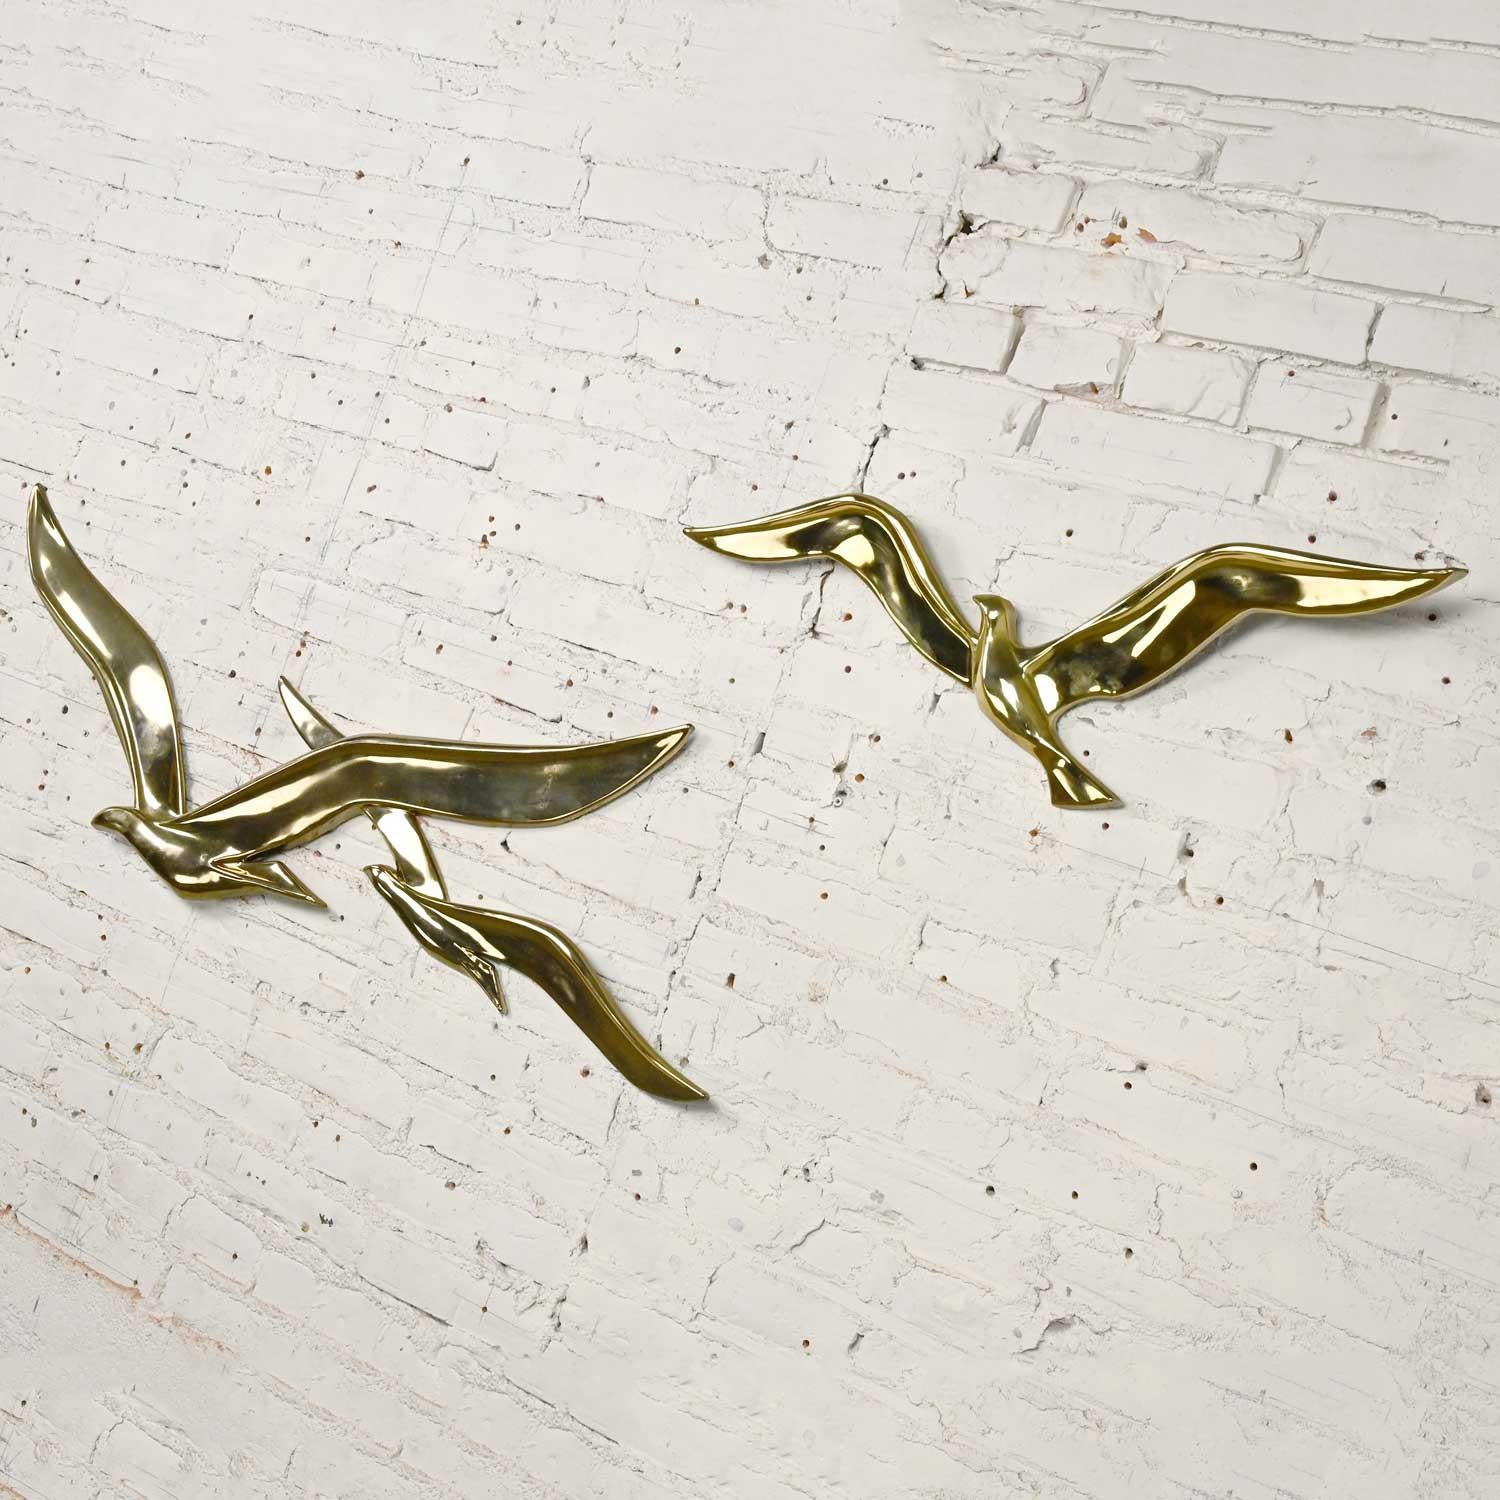 Fabulous vintage mid-century modern gilded plastic seagulls in flight birds 2-piece wall sculpture by Syroco. Beautiful condition, keeping in mind that these are vintage and not new so will have signs of use and wear. The gold has rubbed off in a